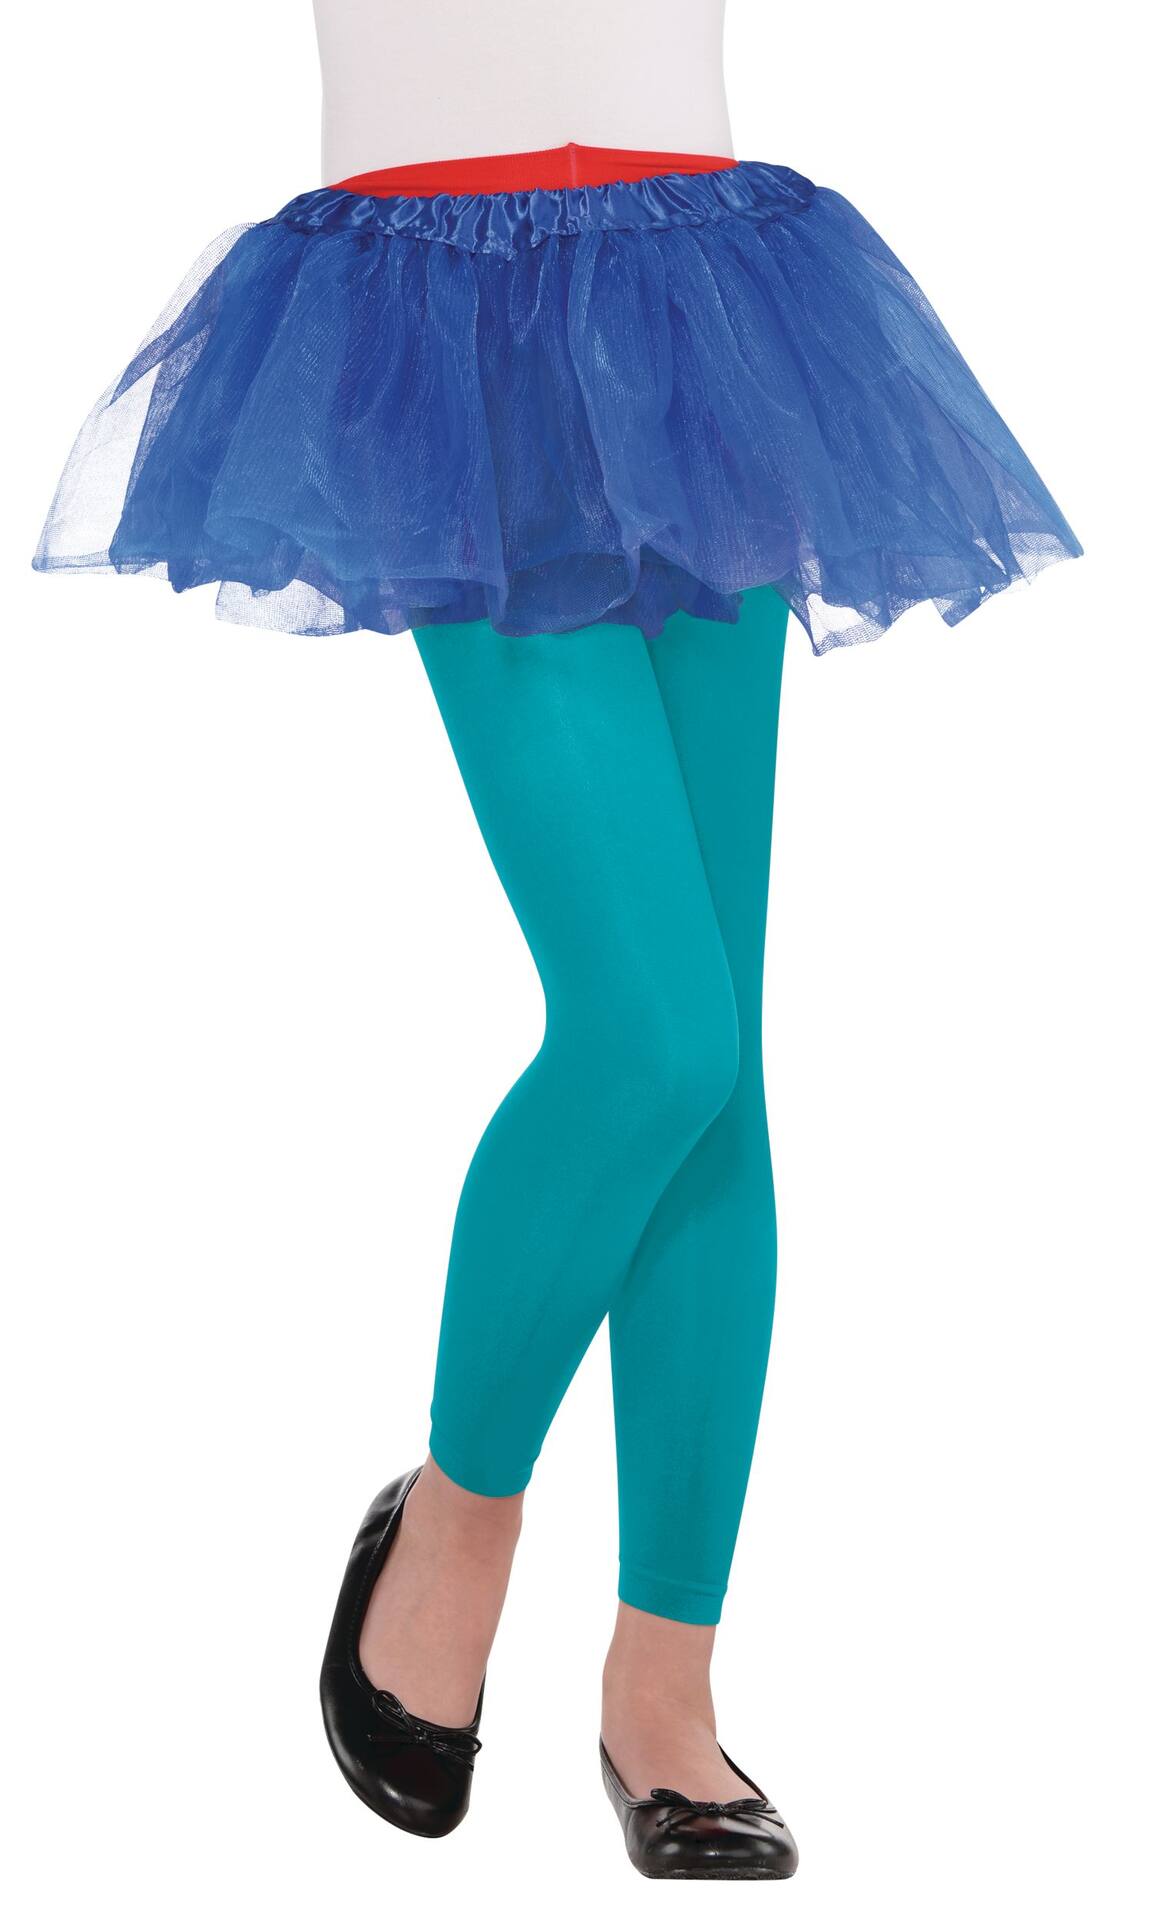 Kids' Footless Tights, Turquoise Blue, One Size, Wearable Costume Accessory  for Halloween